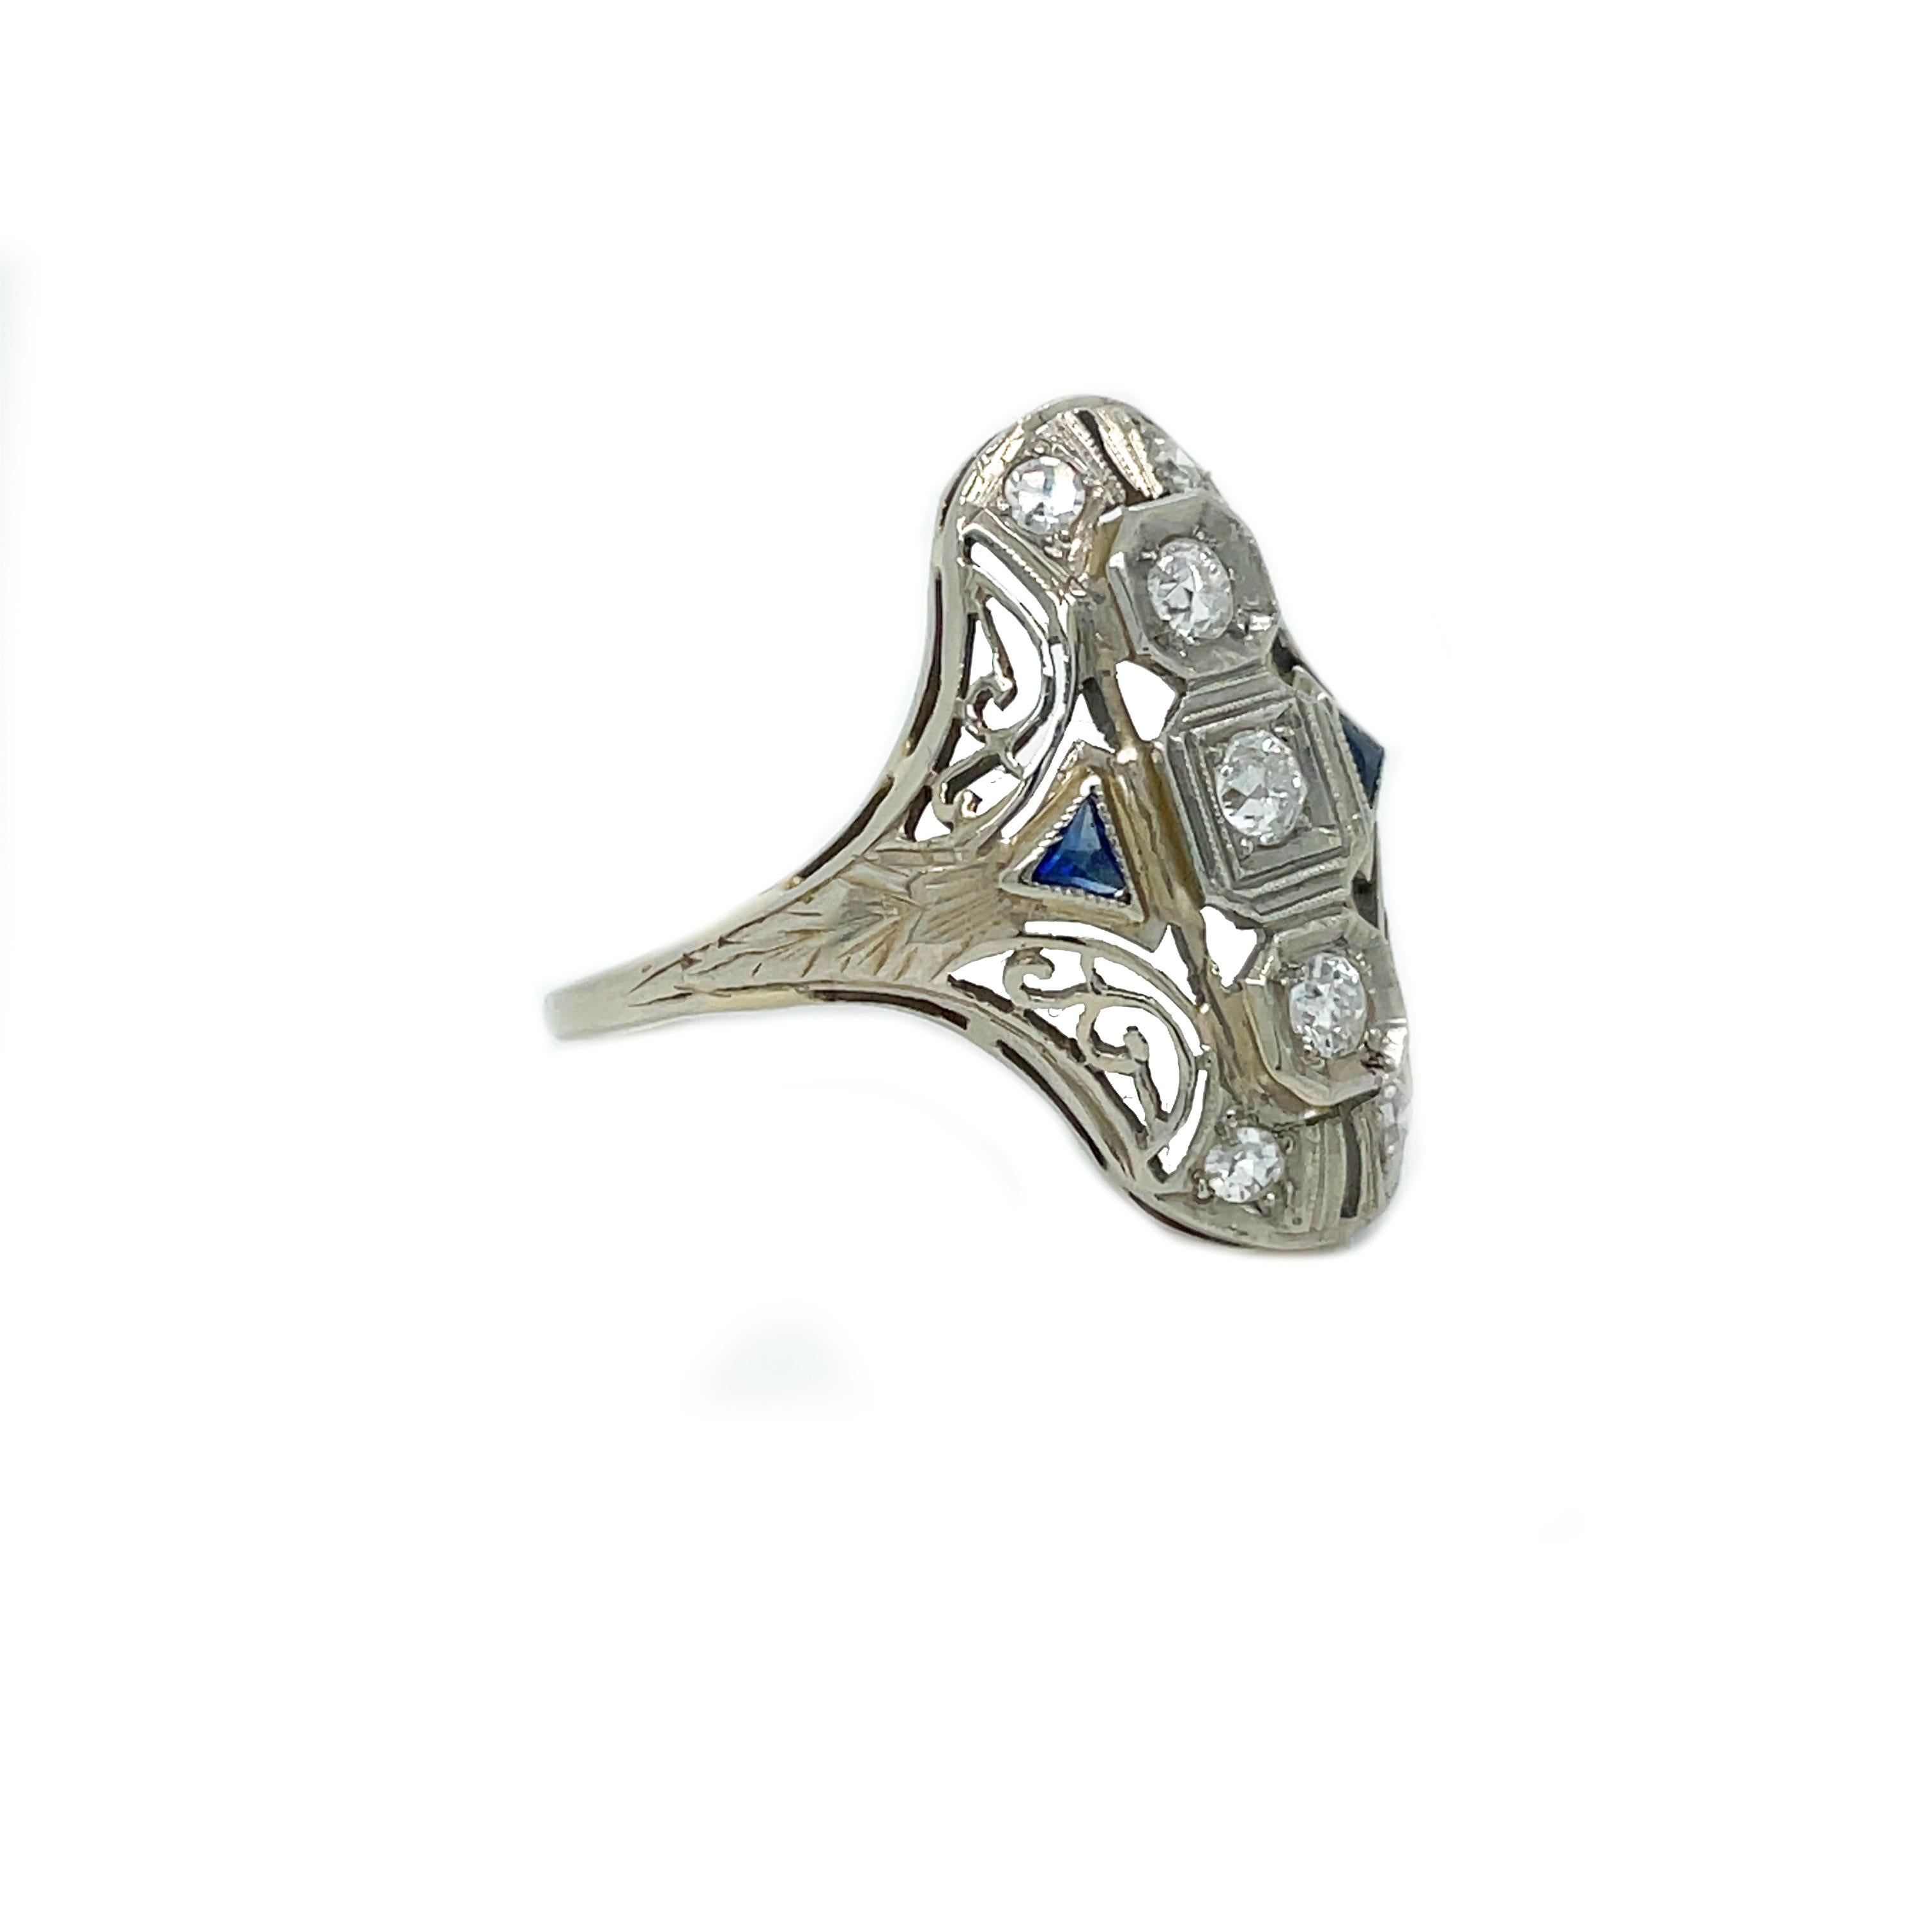 1925 Art Deco 14K Filigree Diamond and Sapphire Ring In Excellent Condition For Sale In Lexington, KY